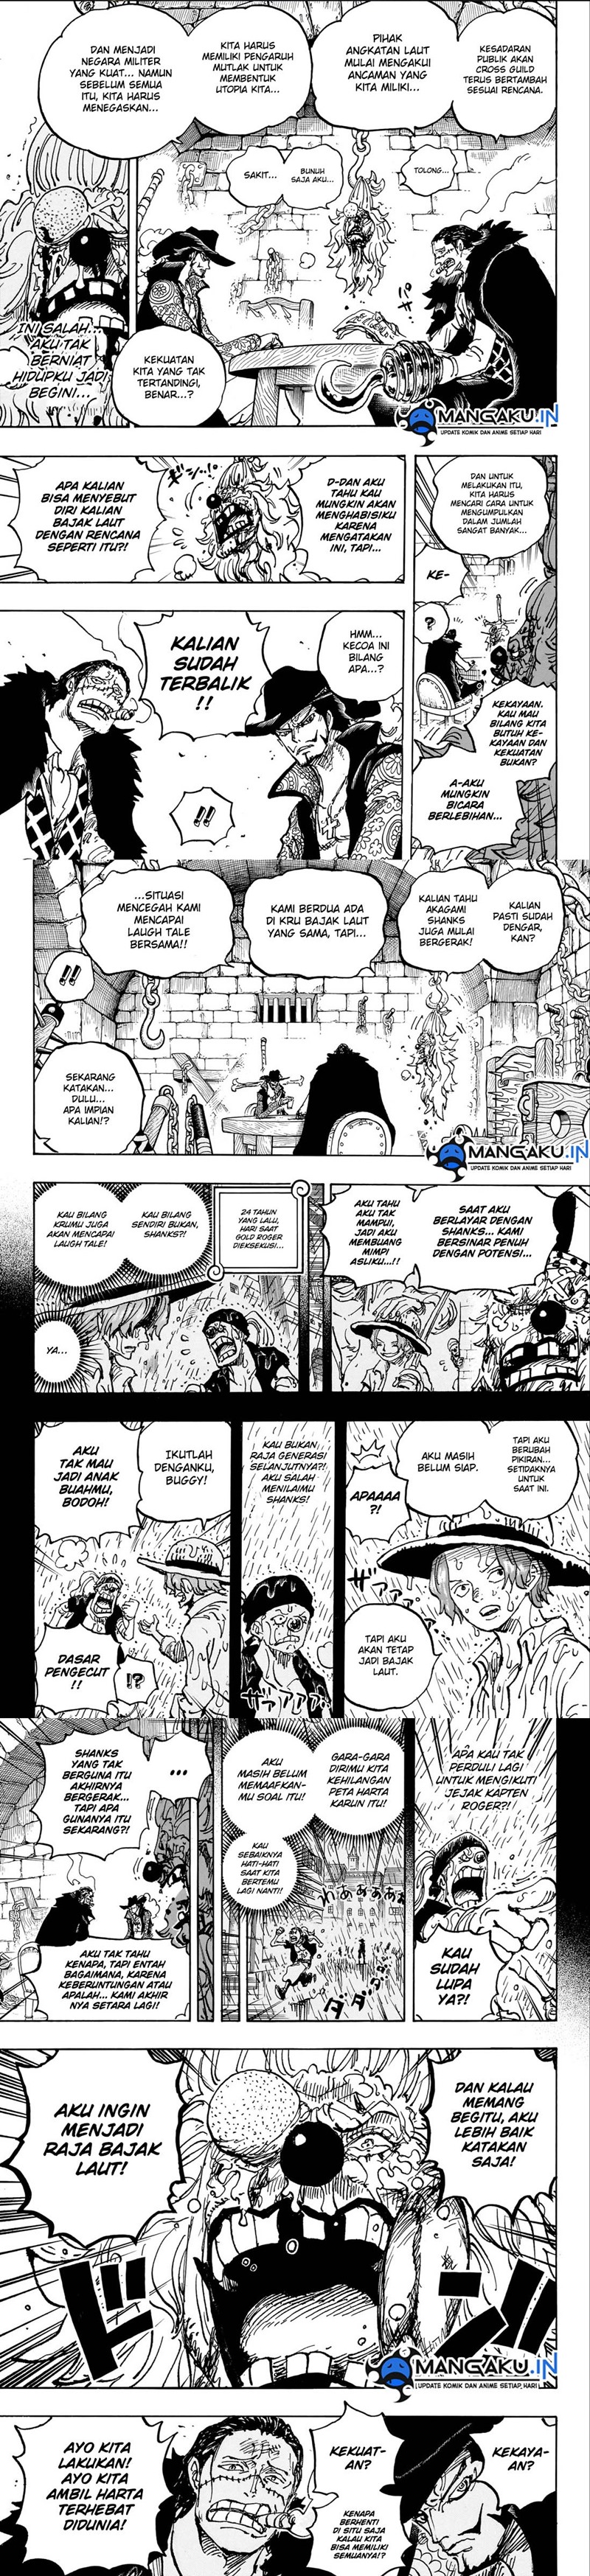 One Piece Chapter 1082 Image 3